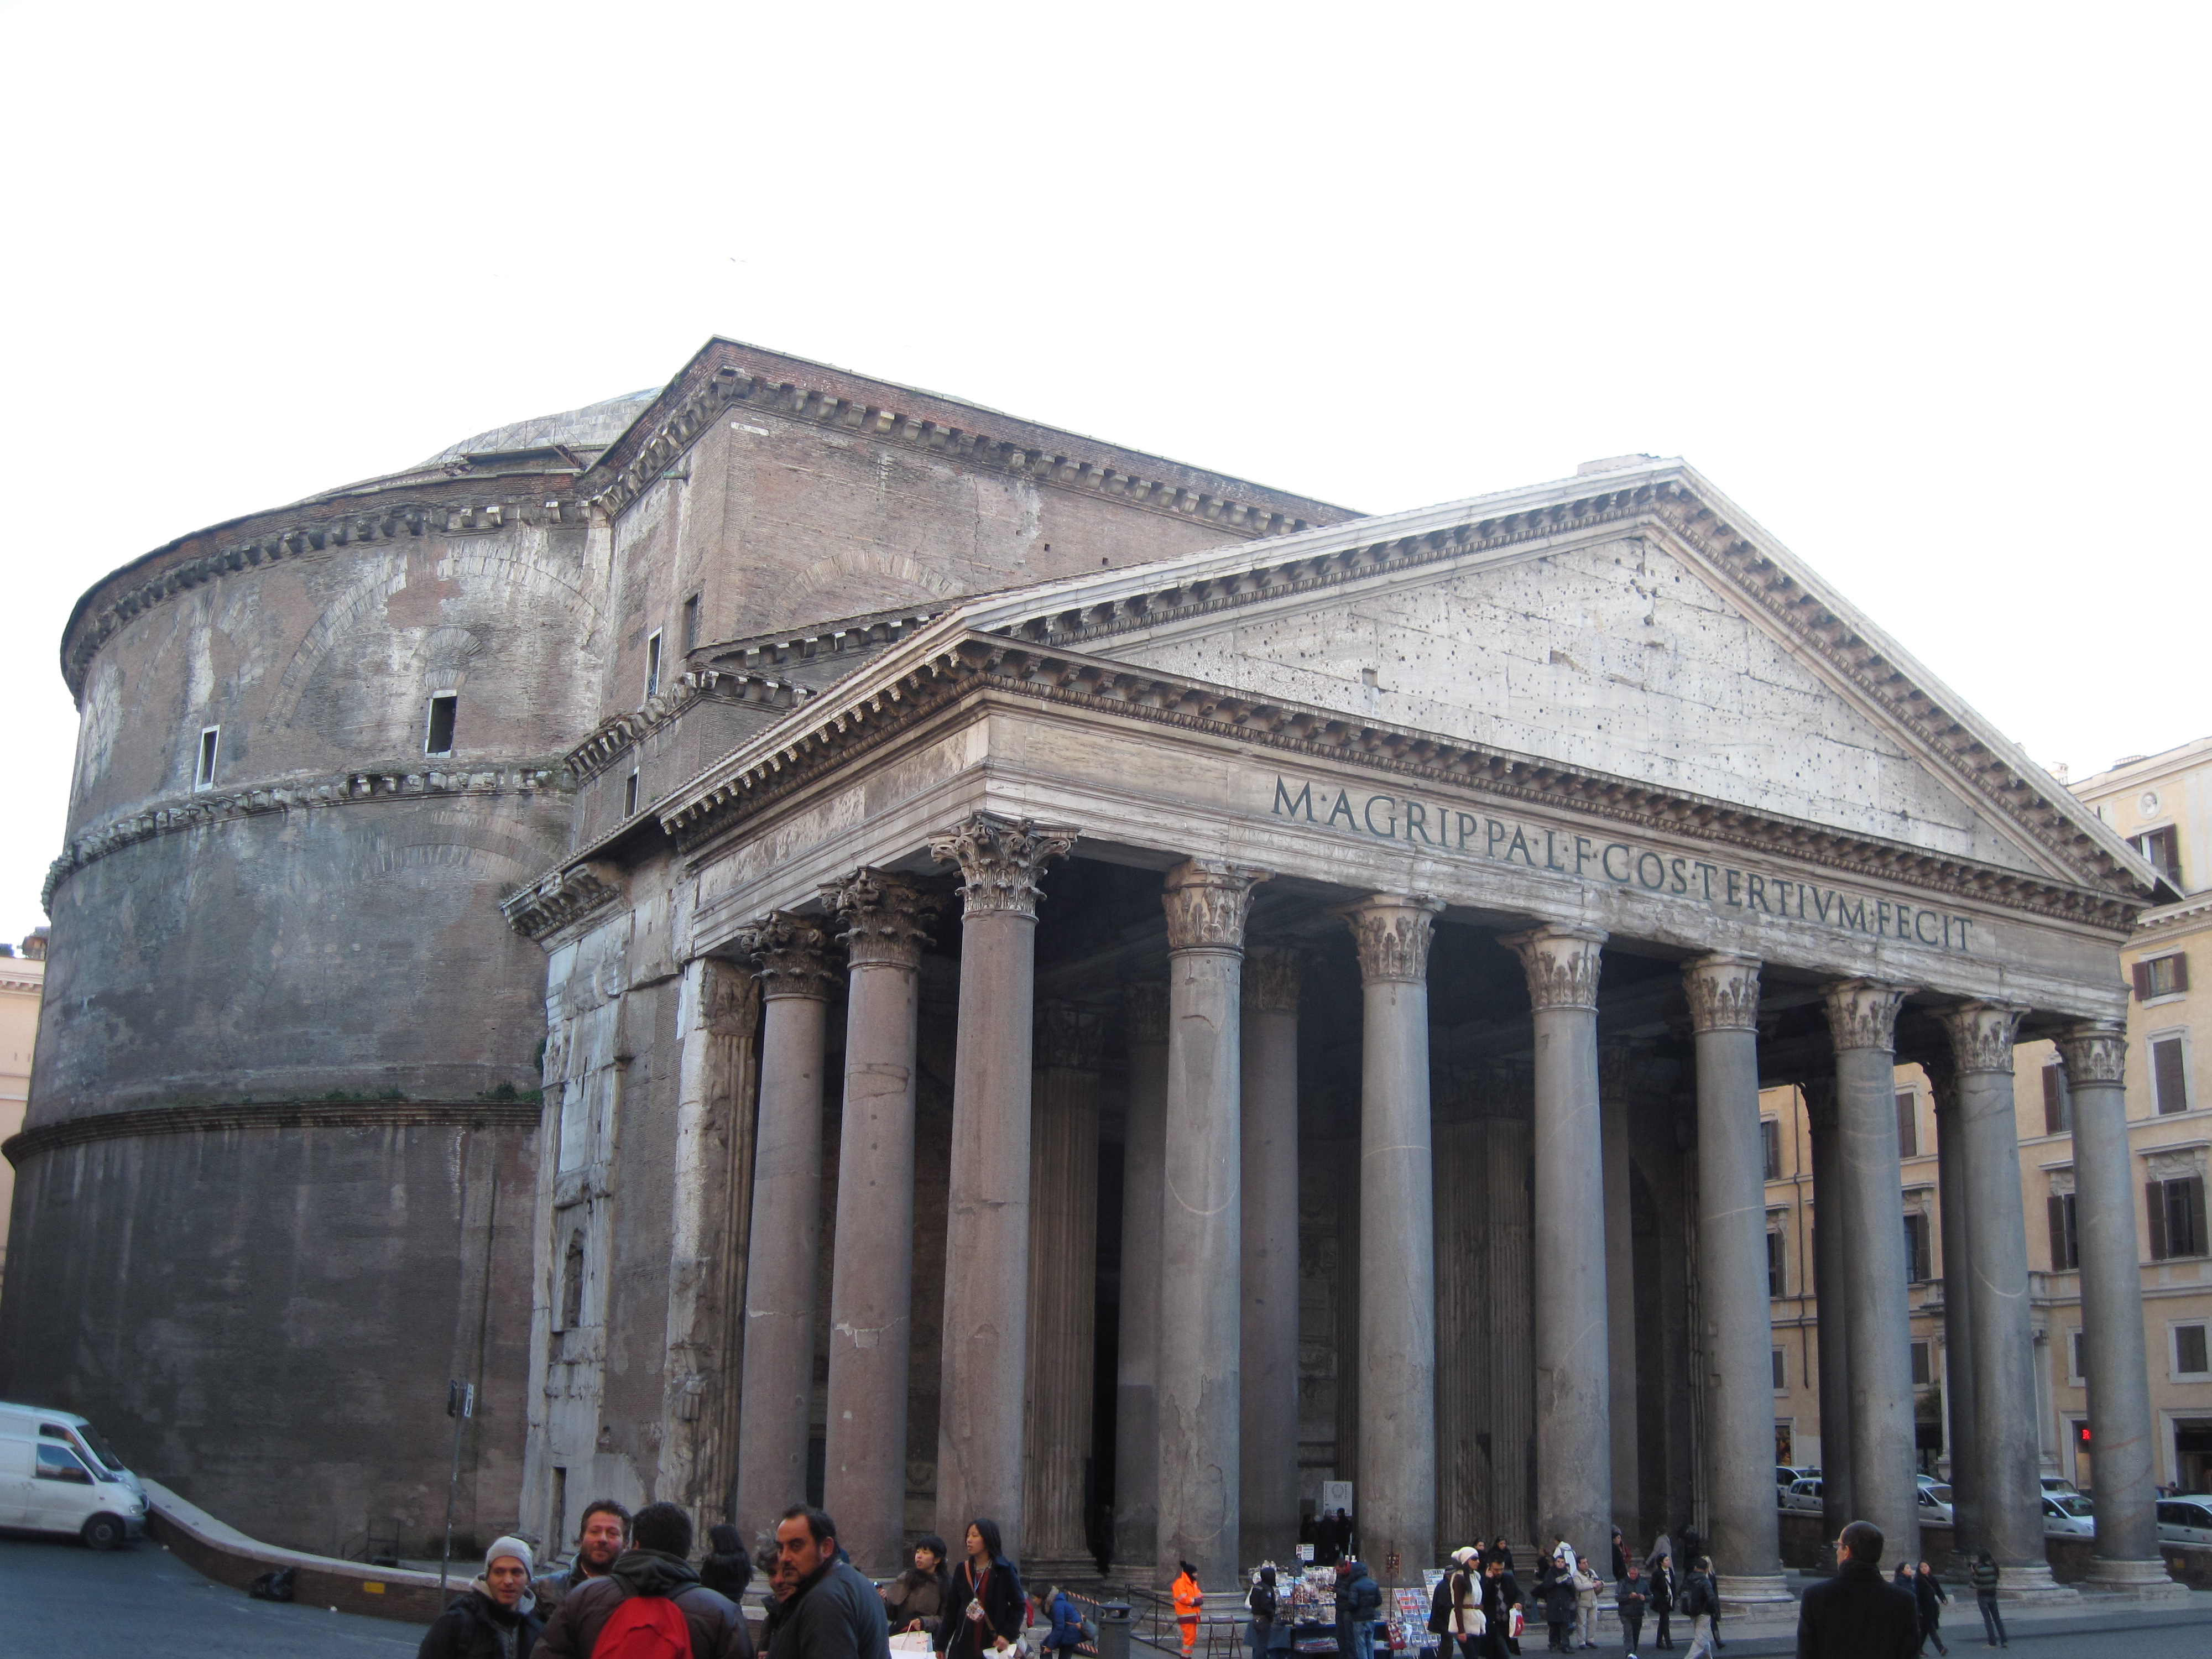 The pantheon in rome, italy photo